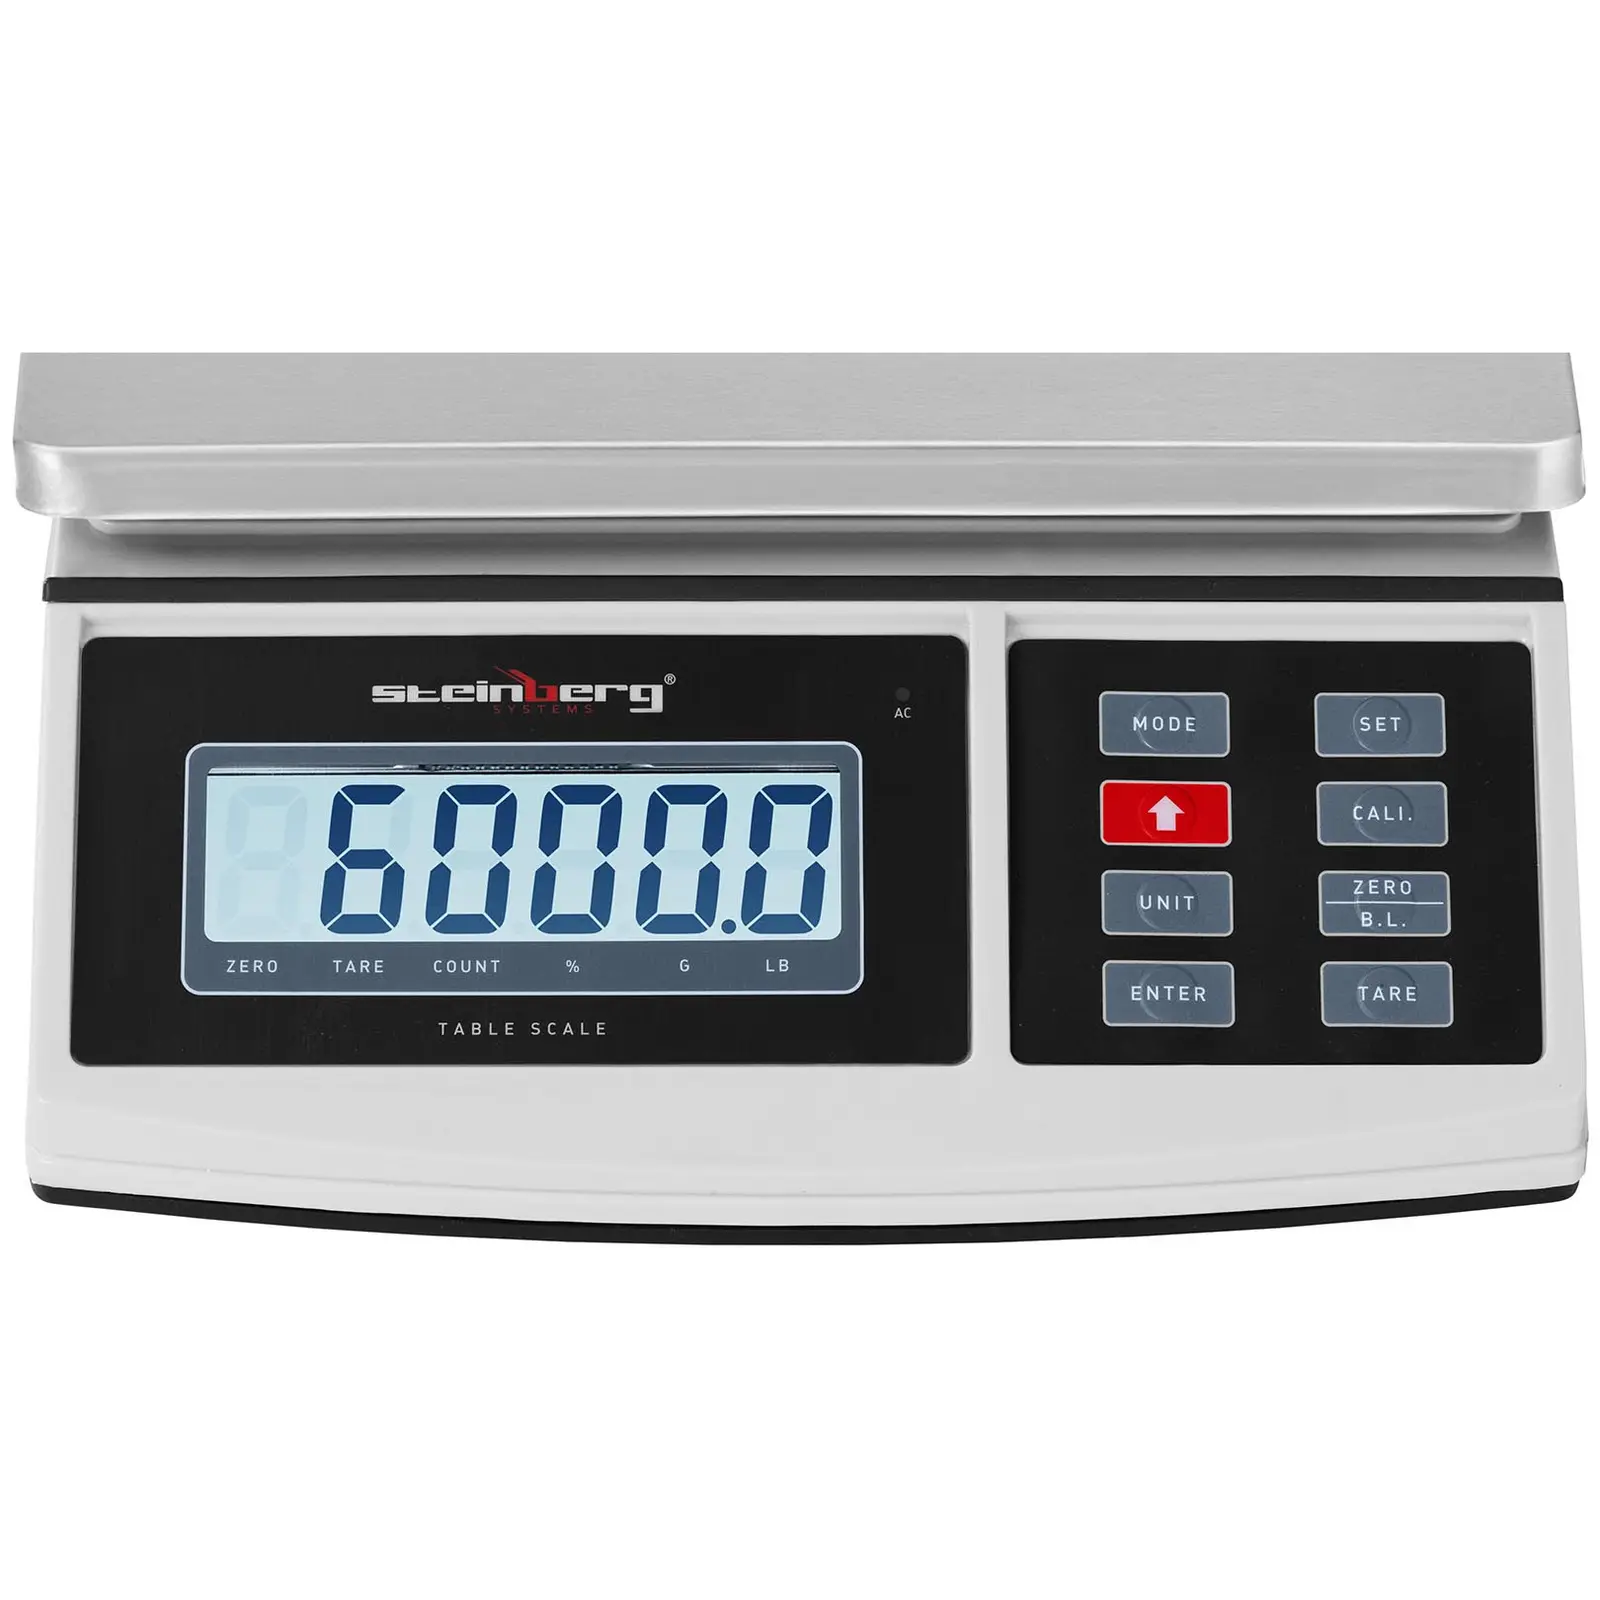 Table Scale - 6 kg / 0.2 g - 21 x 27 cm - LCD